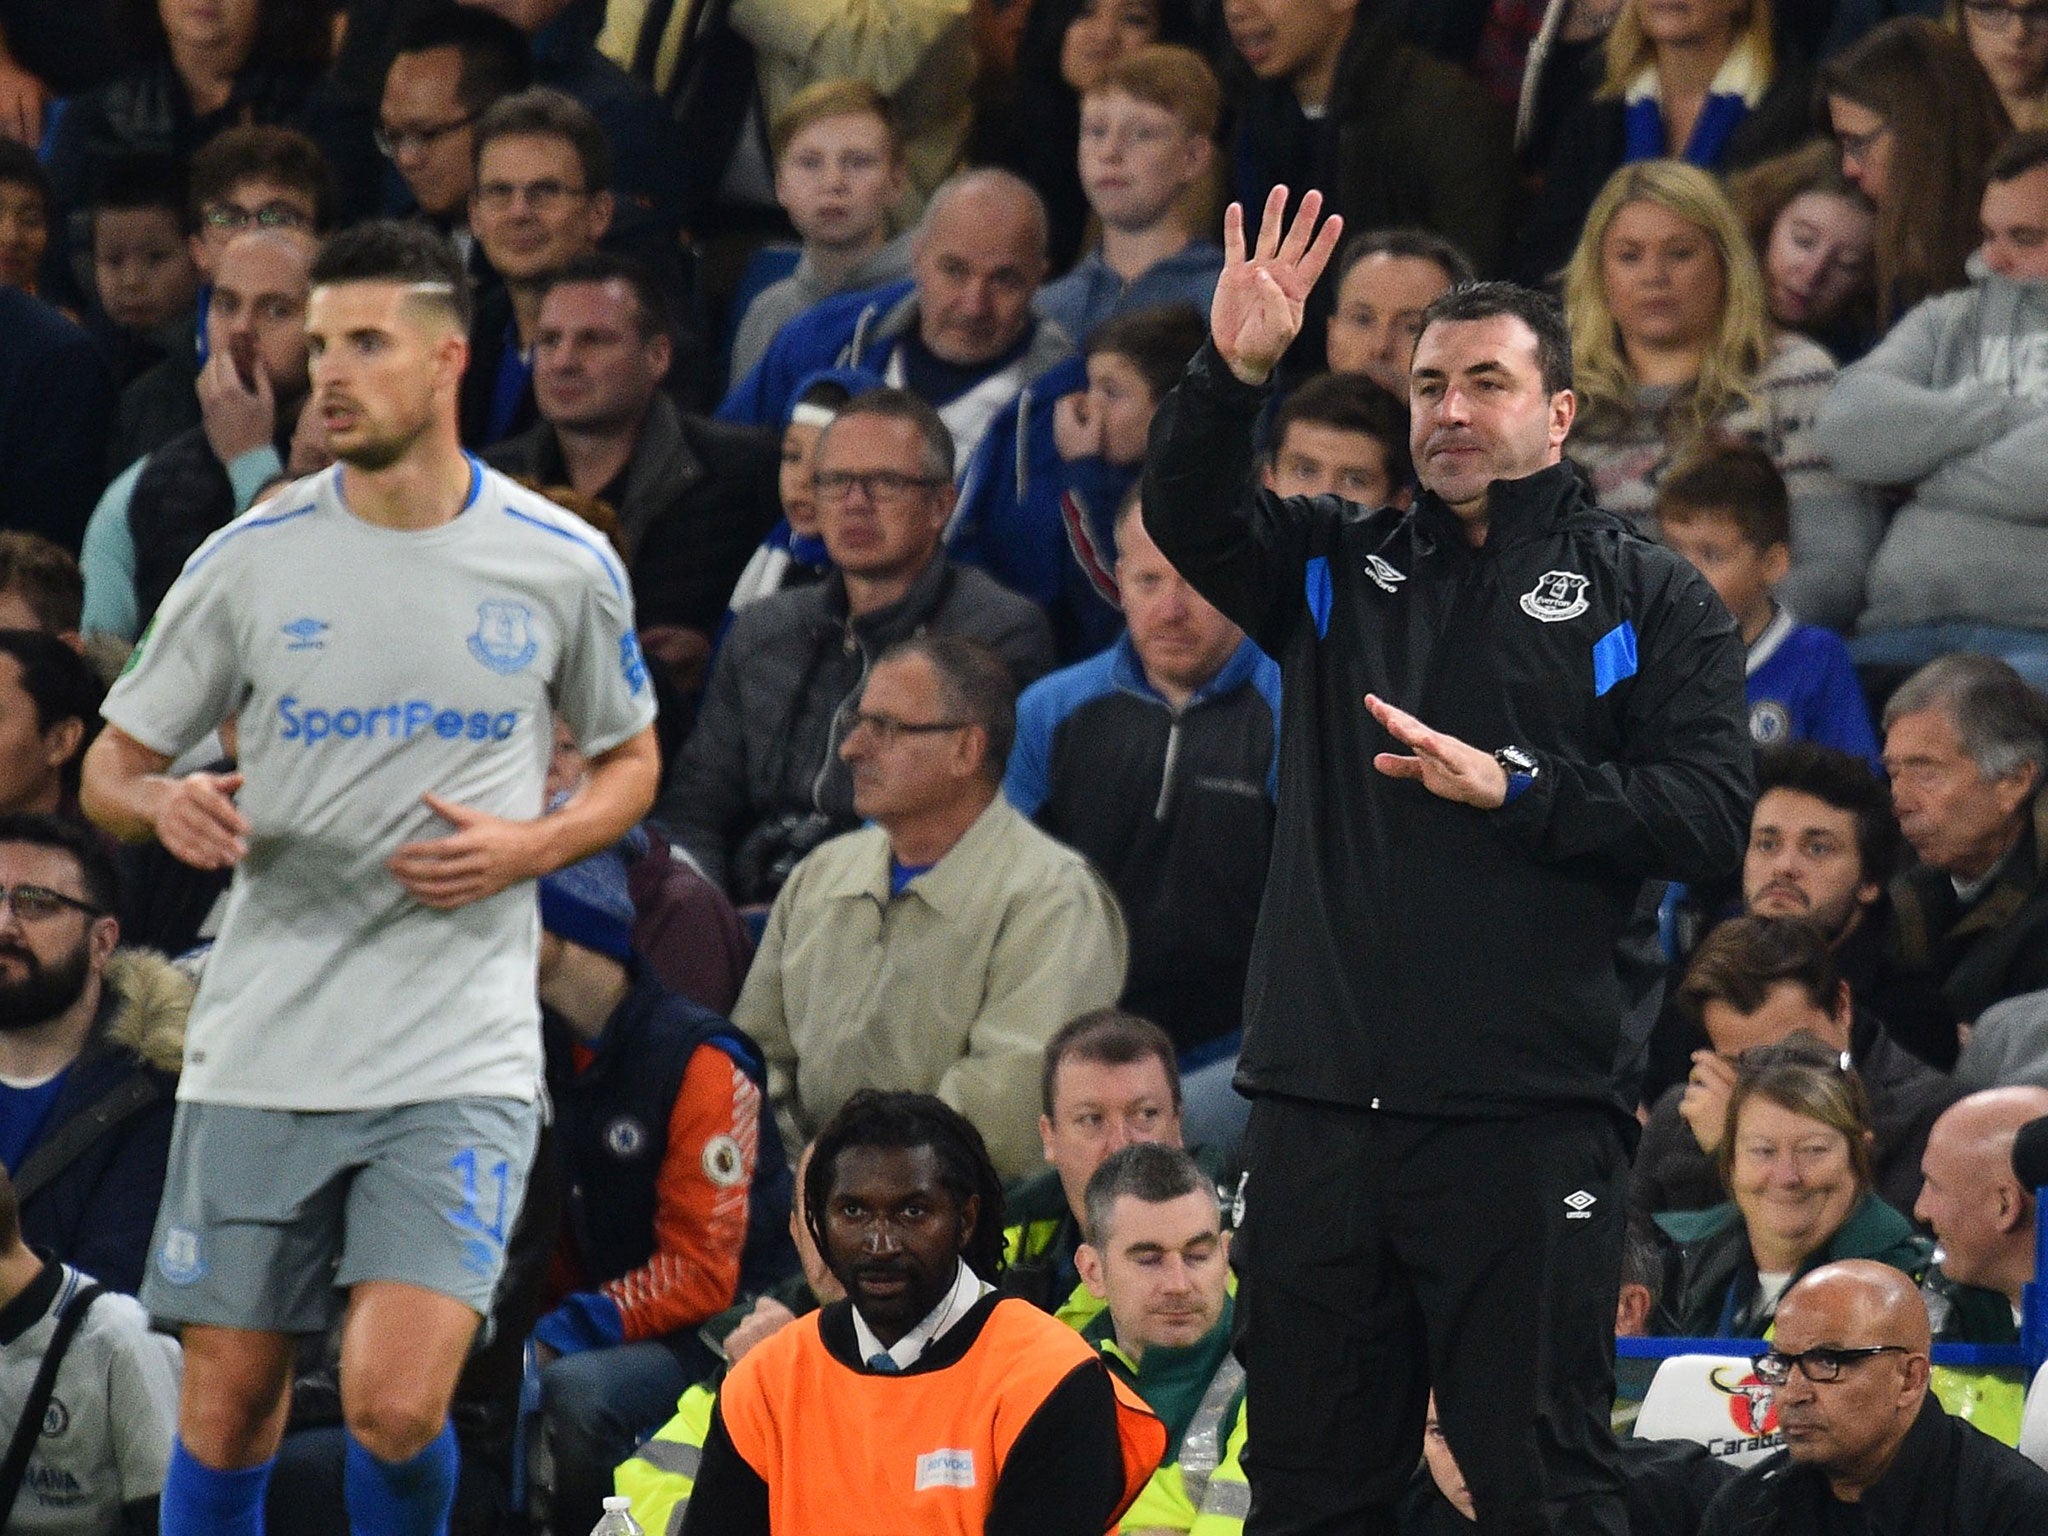 Unsworth tasted defeat in his first Premier League game in charge